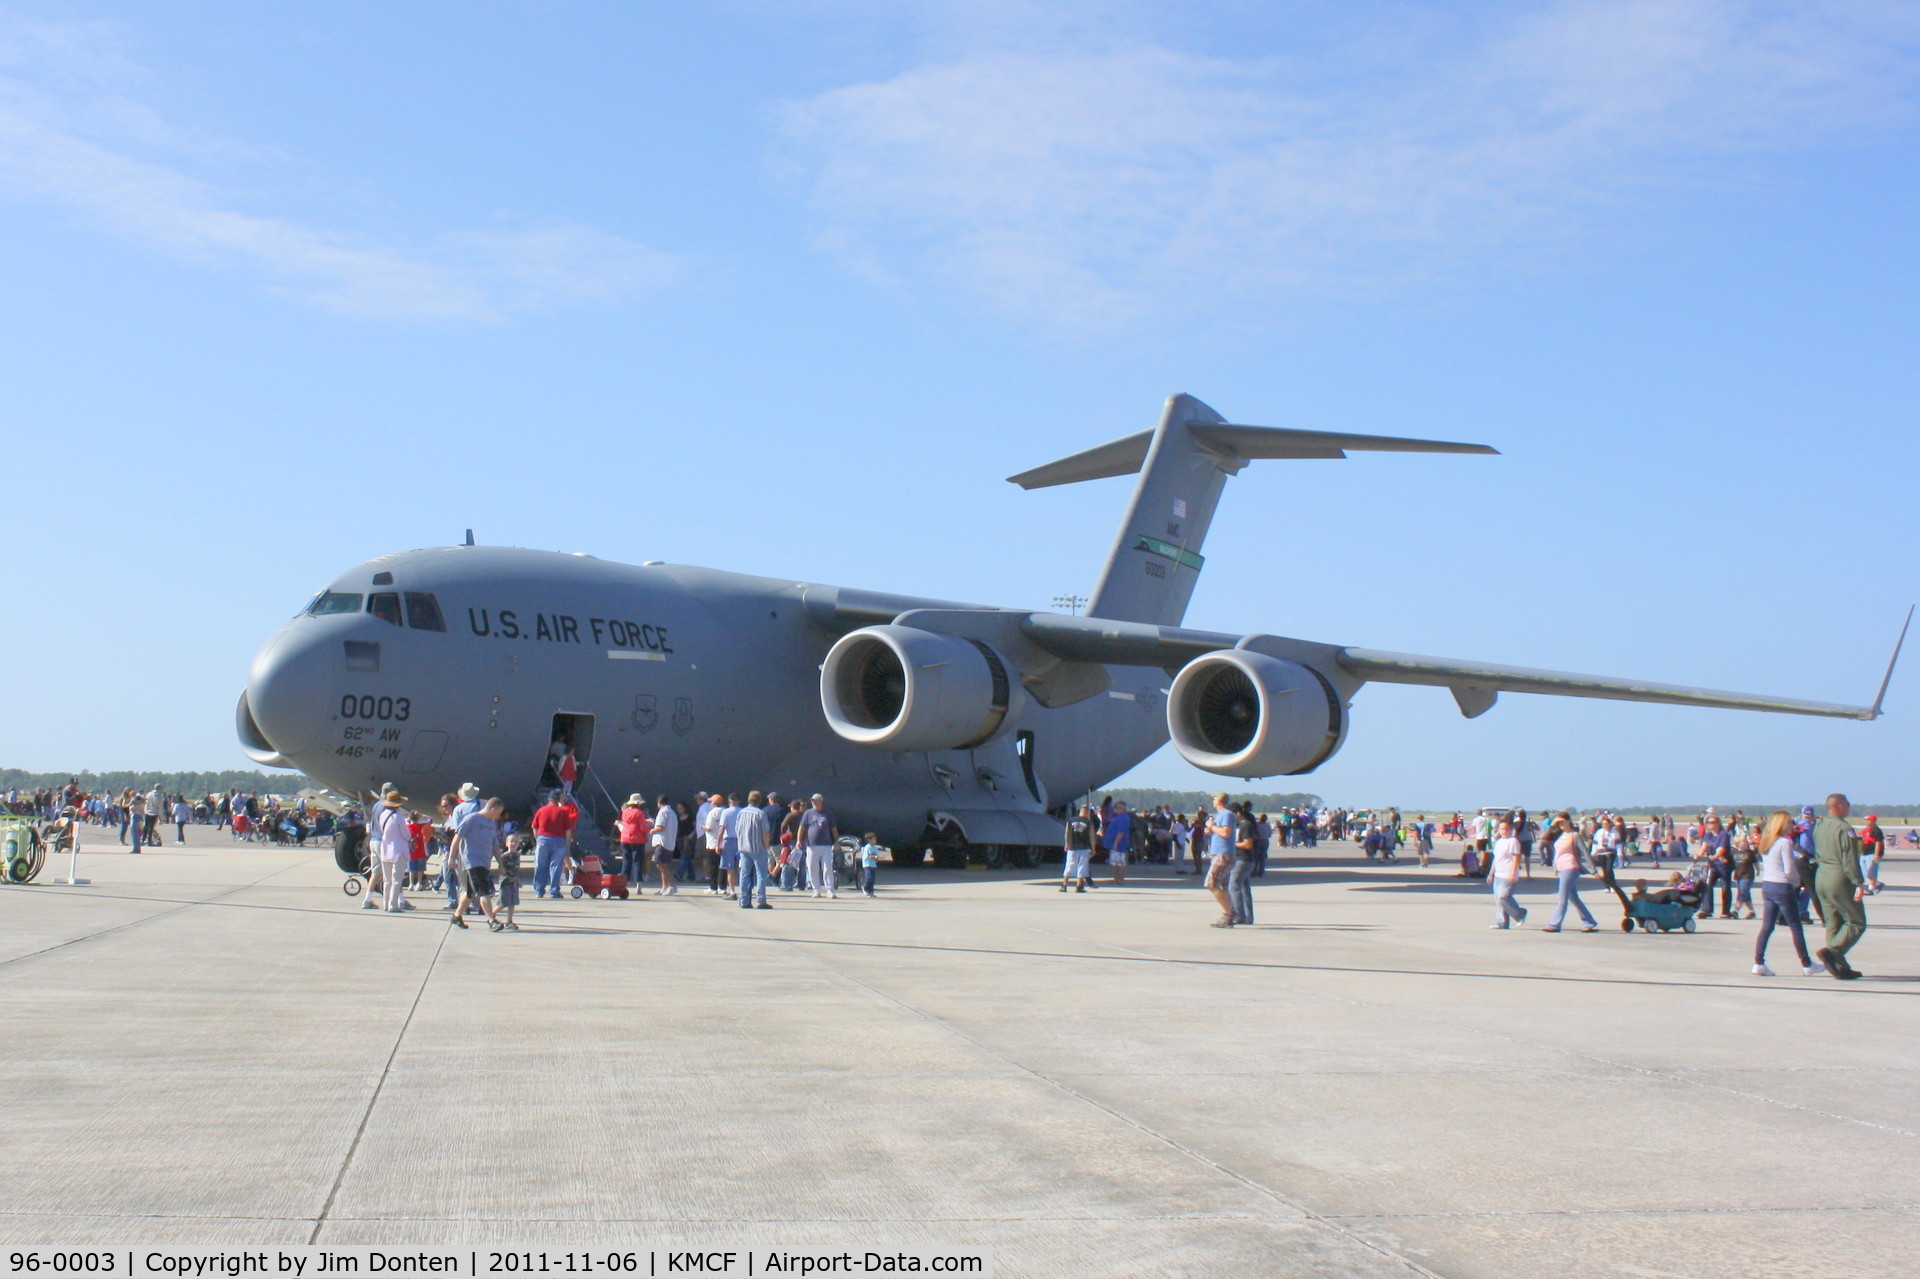 96-0003, 1996 McDonnell Douglas C-17A Globemaster III C/N P-35, C-17 Globemaster III (96-0003) from 62nd/446th Airlift Wing at McChord Air Force Base on display at MacDill Air Fest